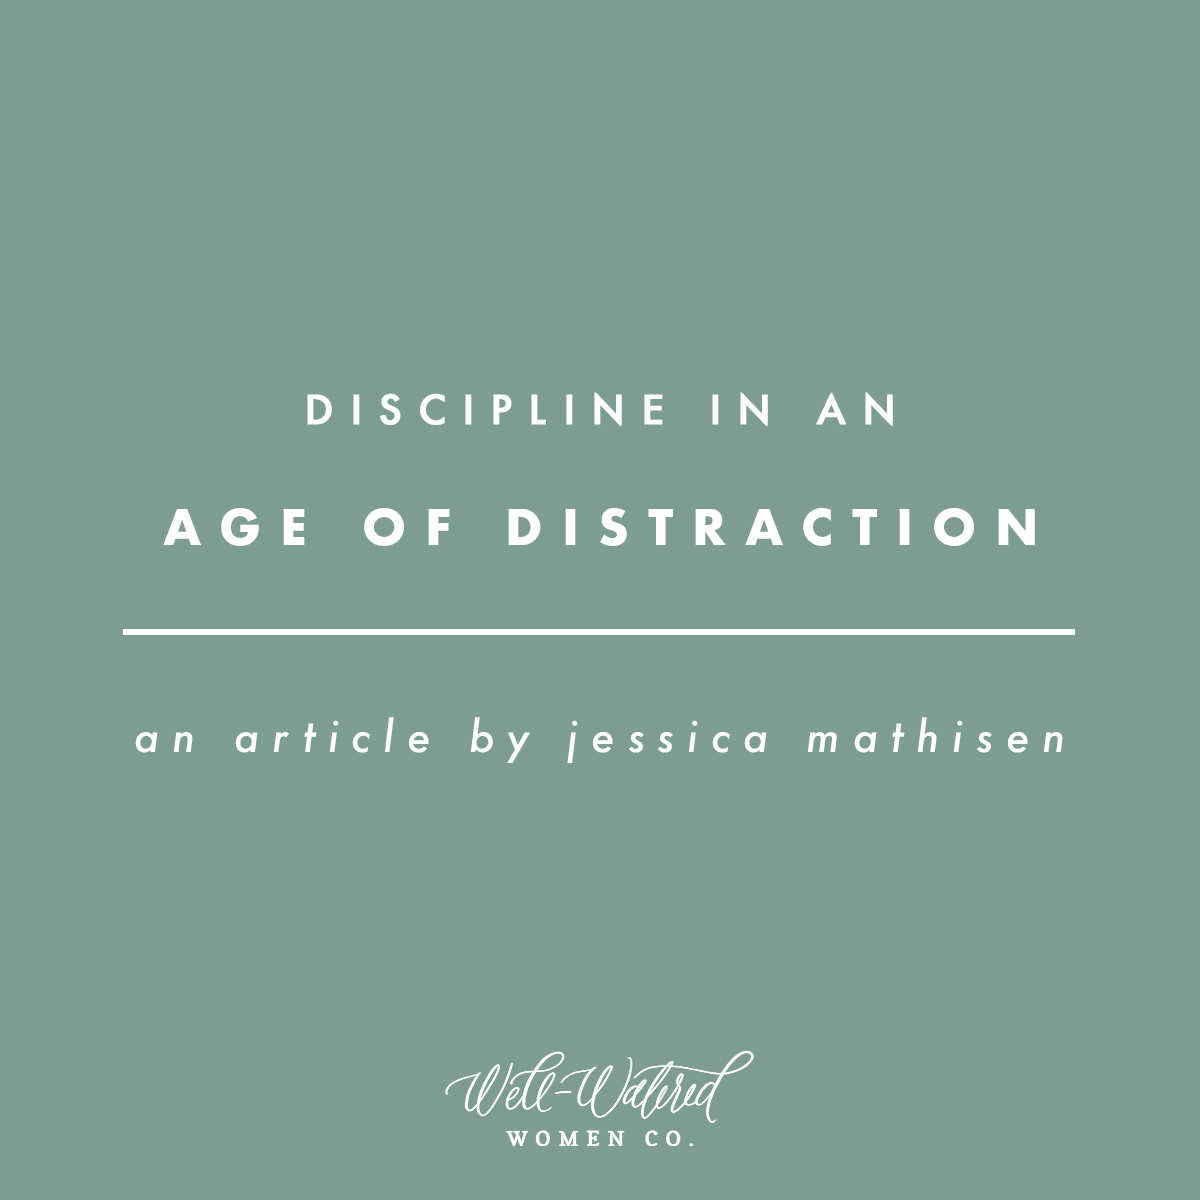 Discipline in an Age of Distraction | Well-Watered Women Articles